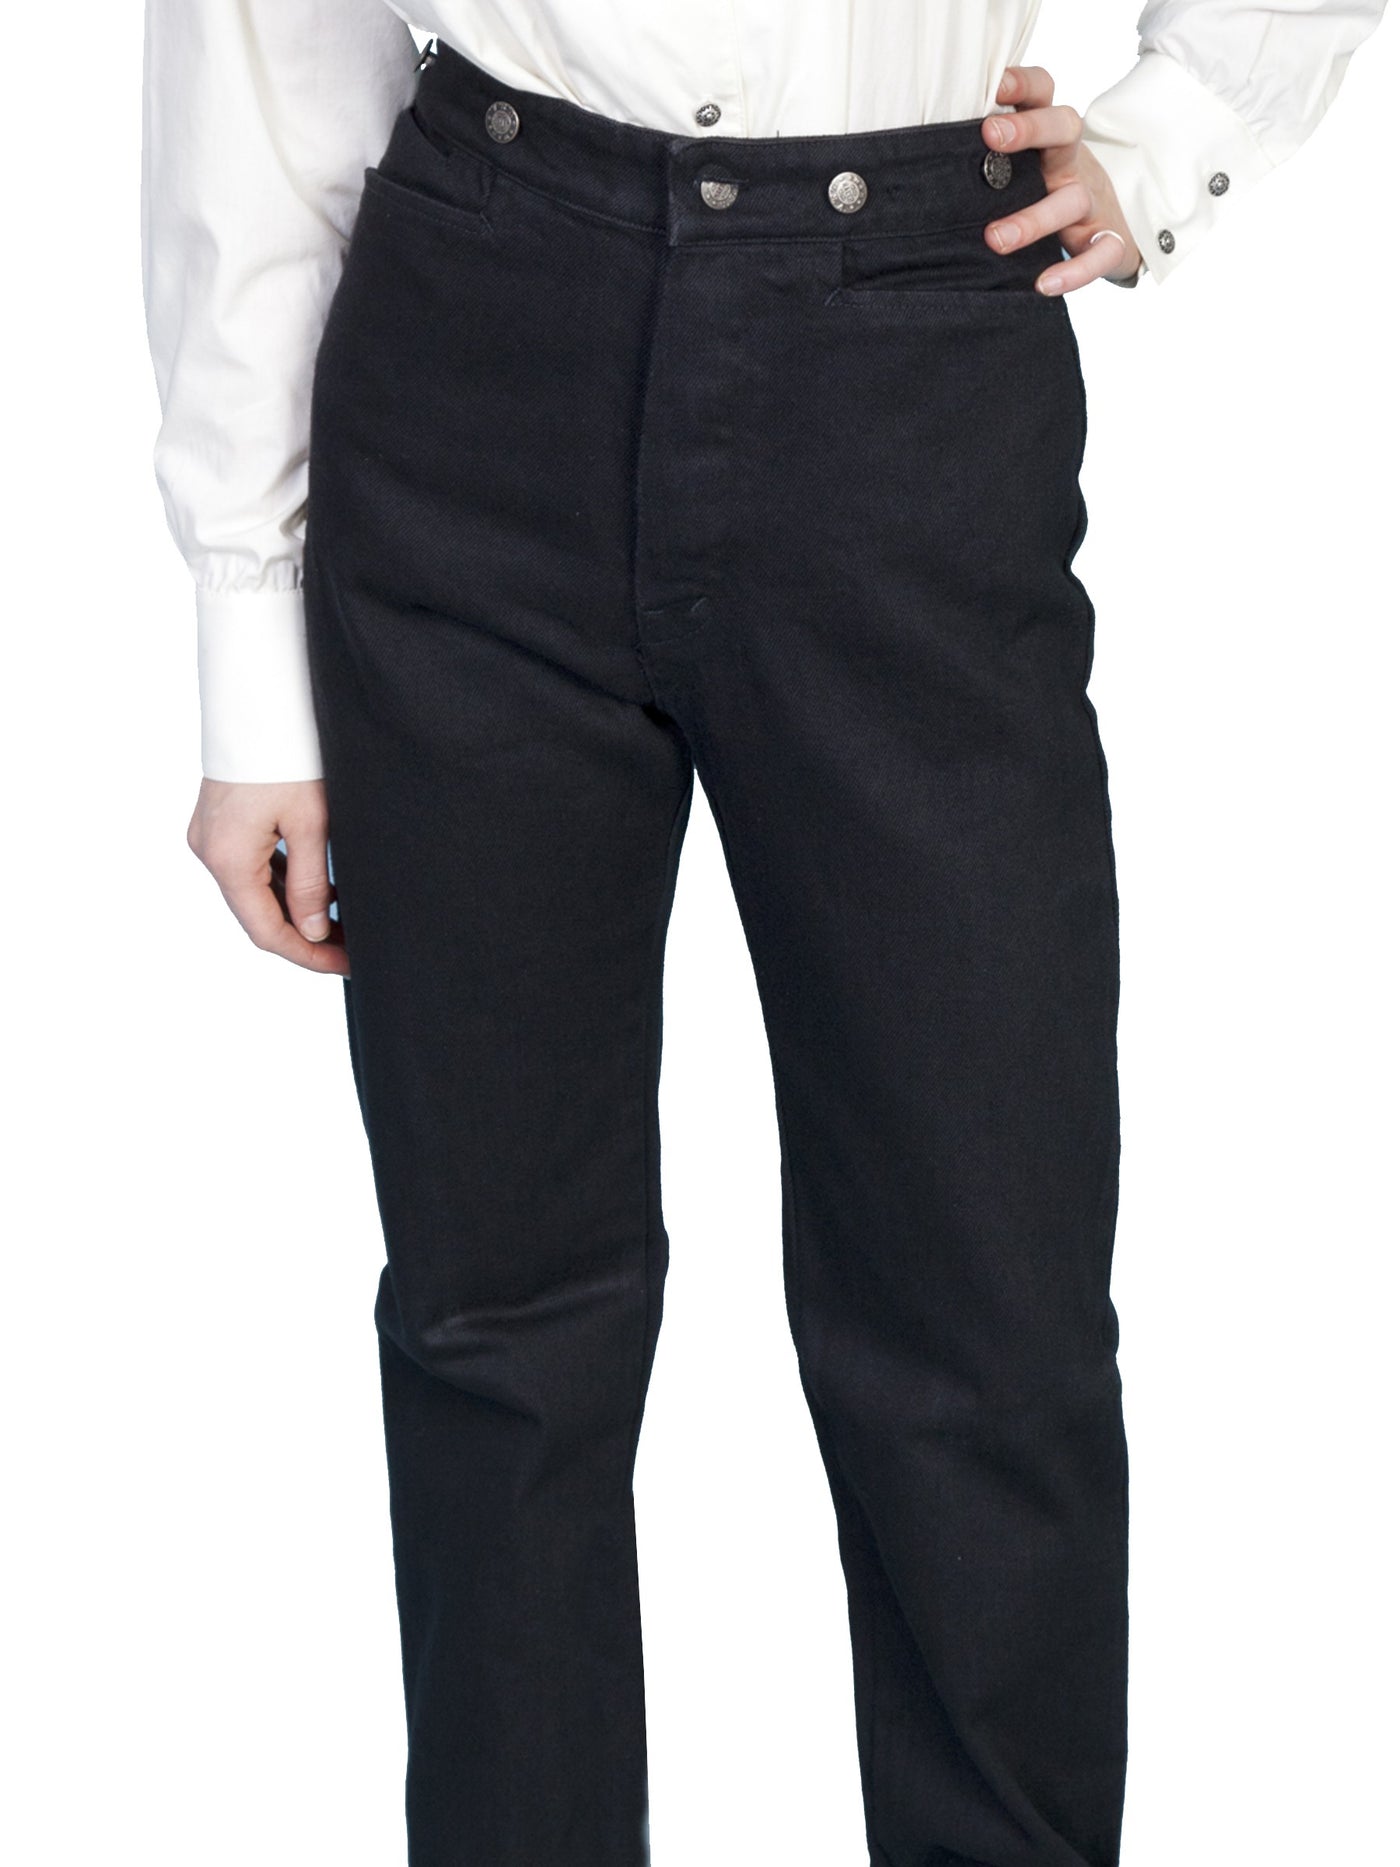 Victorian Style Canvas Pants in Black - SOLD OUT